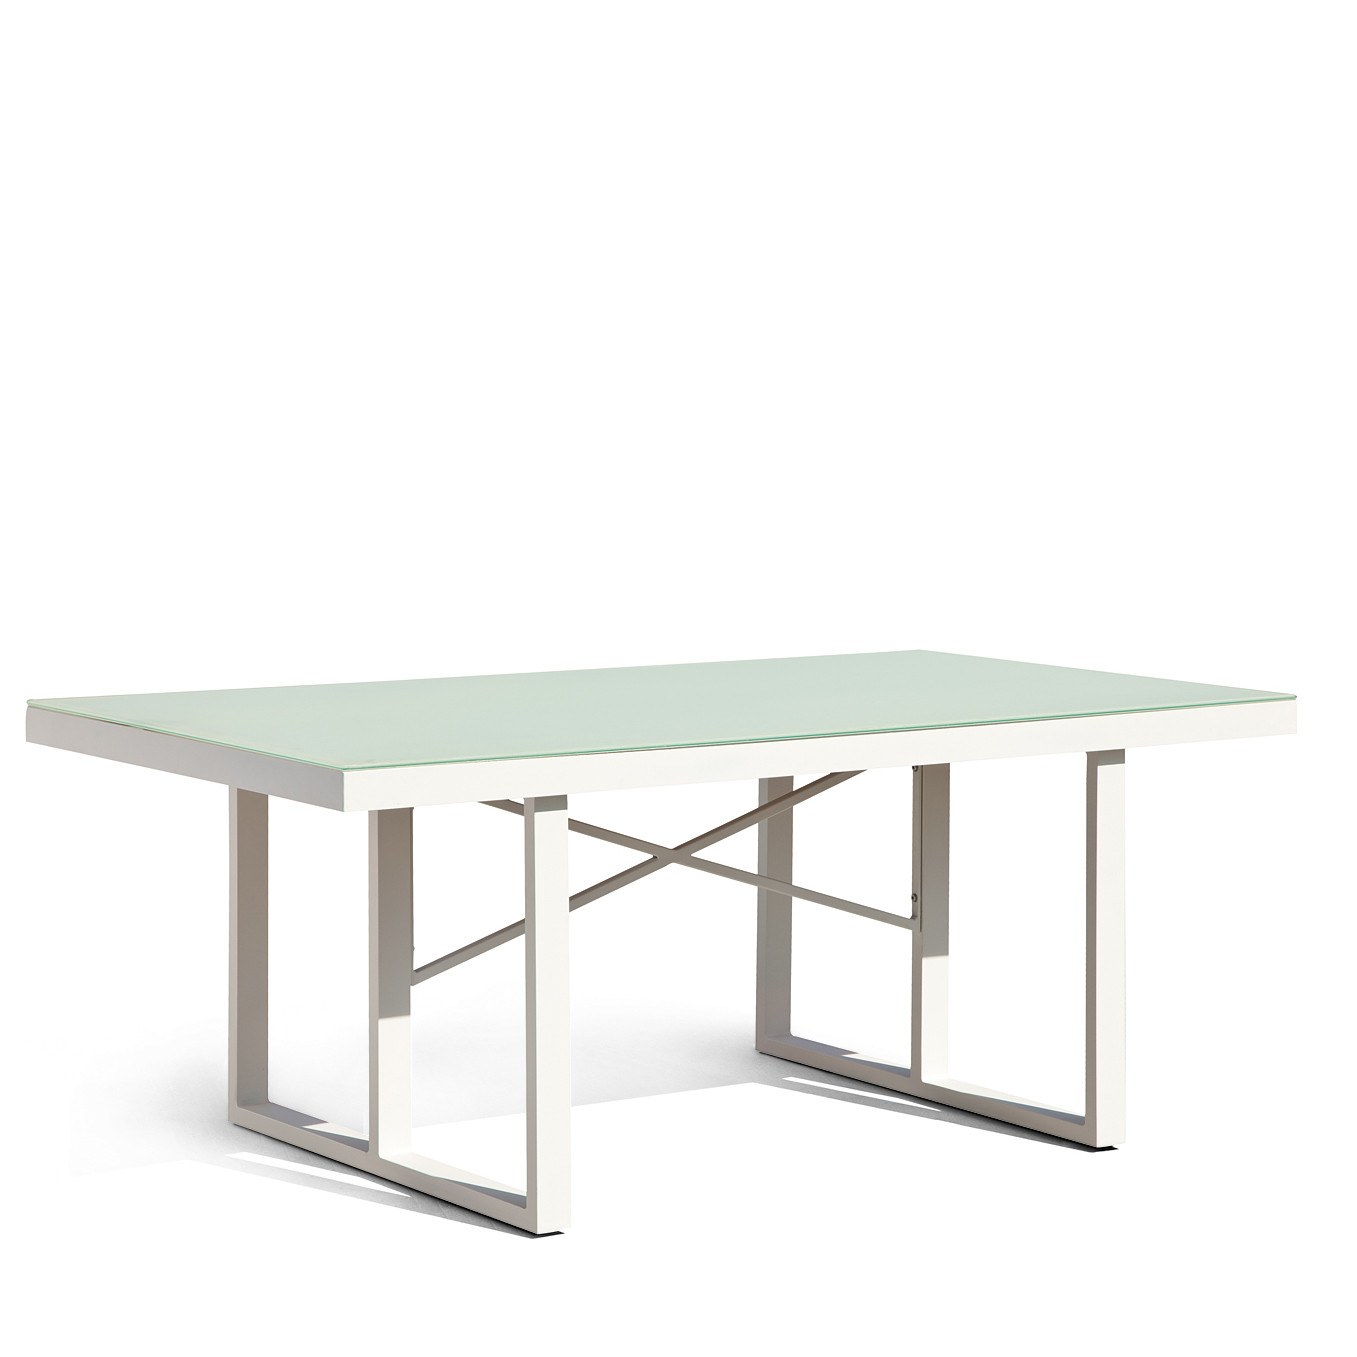 Contract Quality Outdoor Furniture Dining Table Glass Top